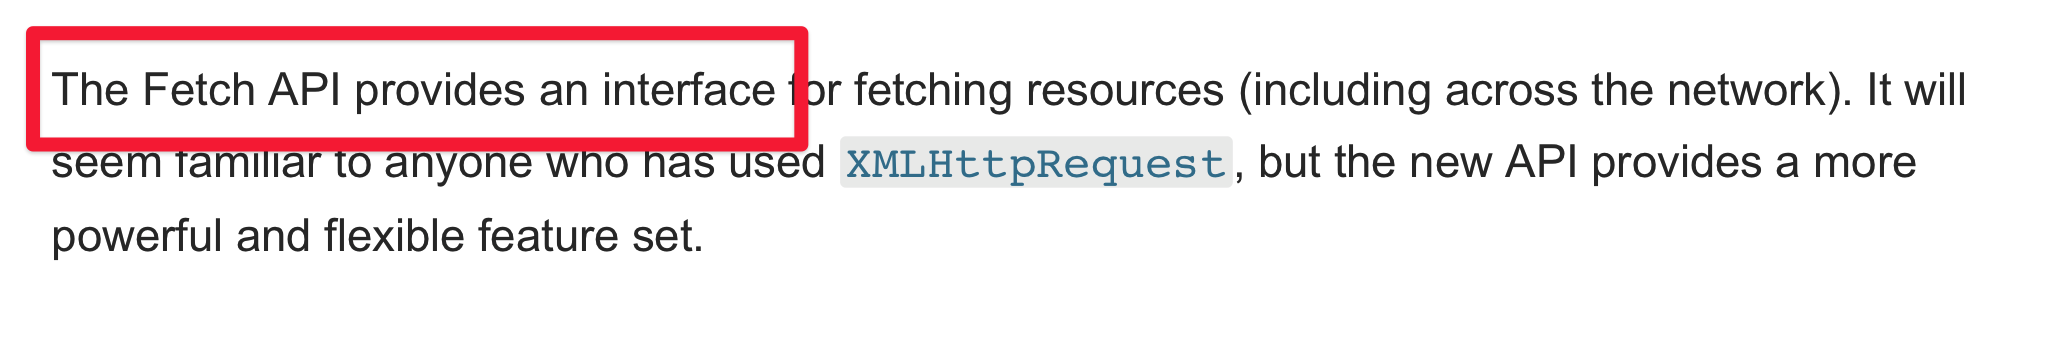 MDN documentations says Fetch API provides an interface.